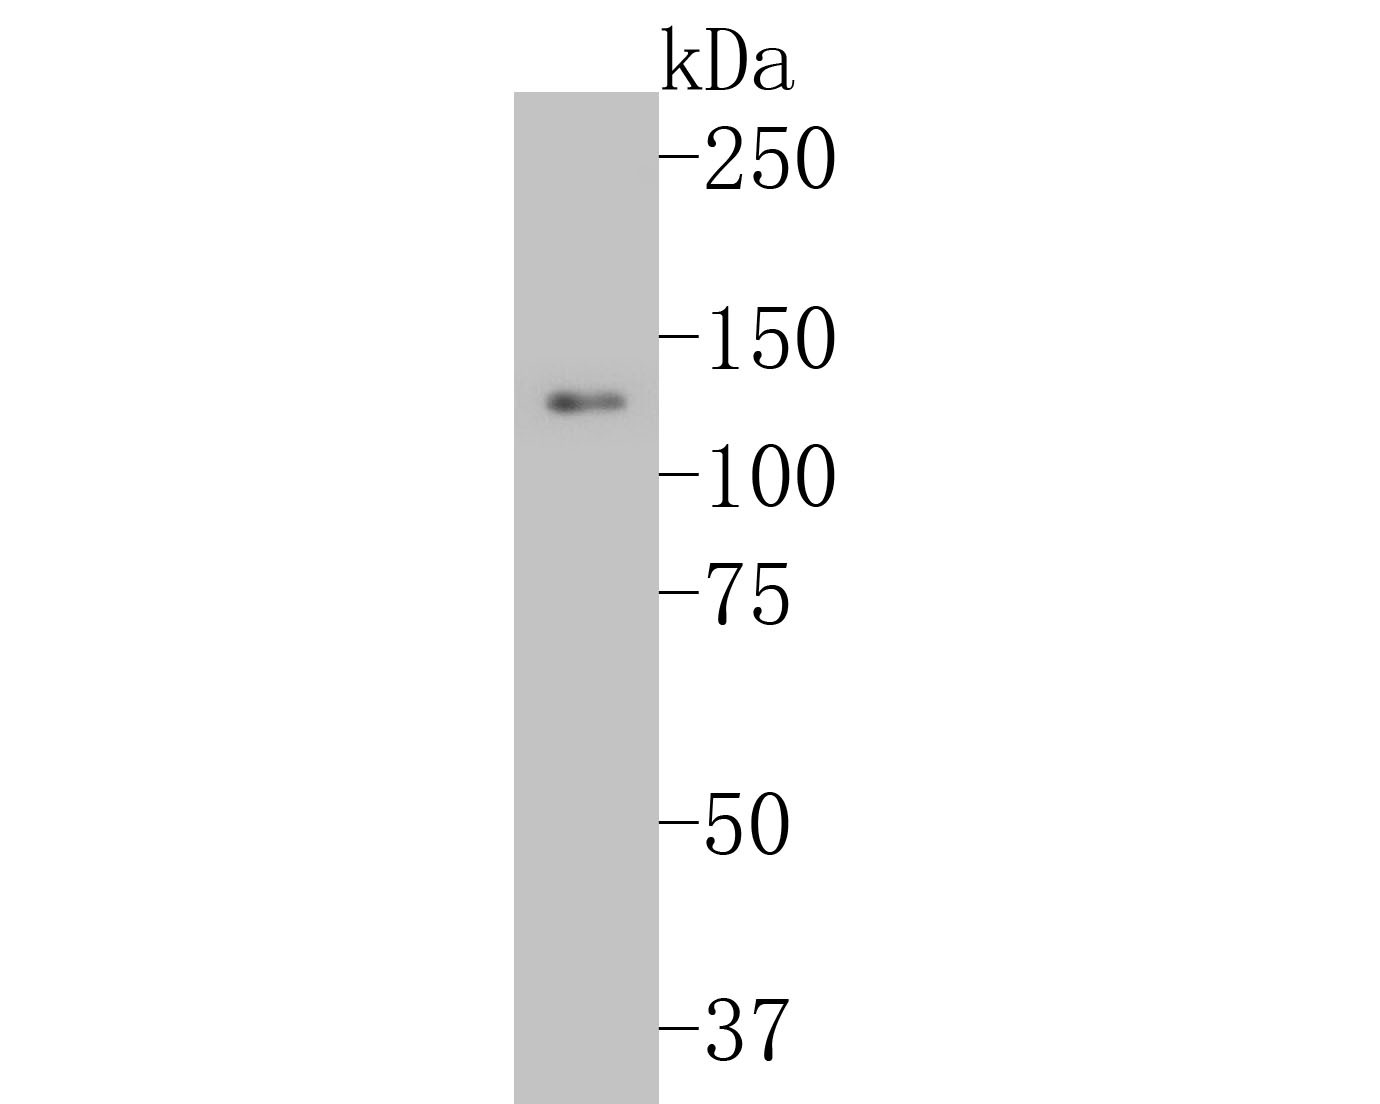 Western blot analysis of Integrin beta 3 on HUVEC cell lysates. Proteins were transferred to a PVDF membrane and blocked with 5% BSA in PBS for 1 hour at room temperature. The primary antibody (ET7110-61, 1/500) was used in 5% BSA at room temperature for 2 hours. Goat Anti-Rabbit IgG - HRP Secondary Antibody (HA1001) at 1:5,000 dilution was used for 1 hour at room temperature.